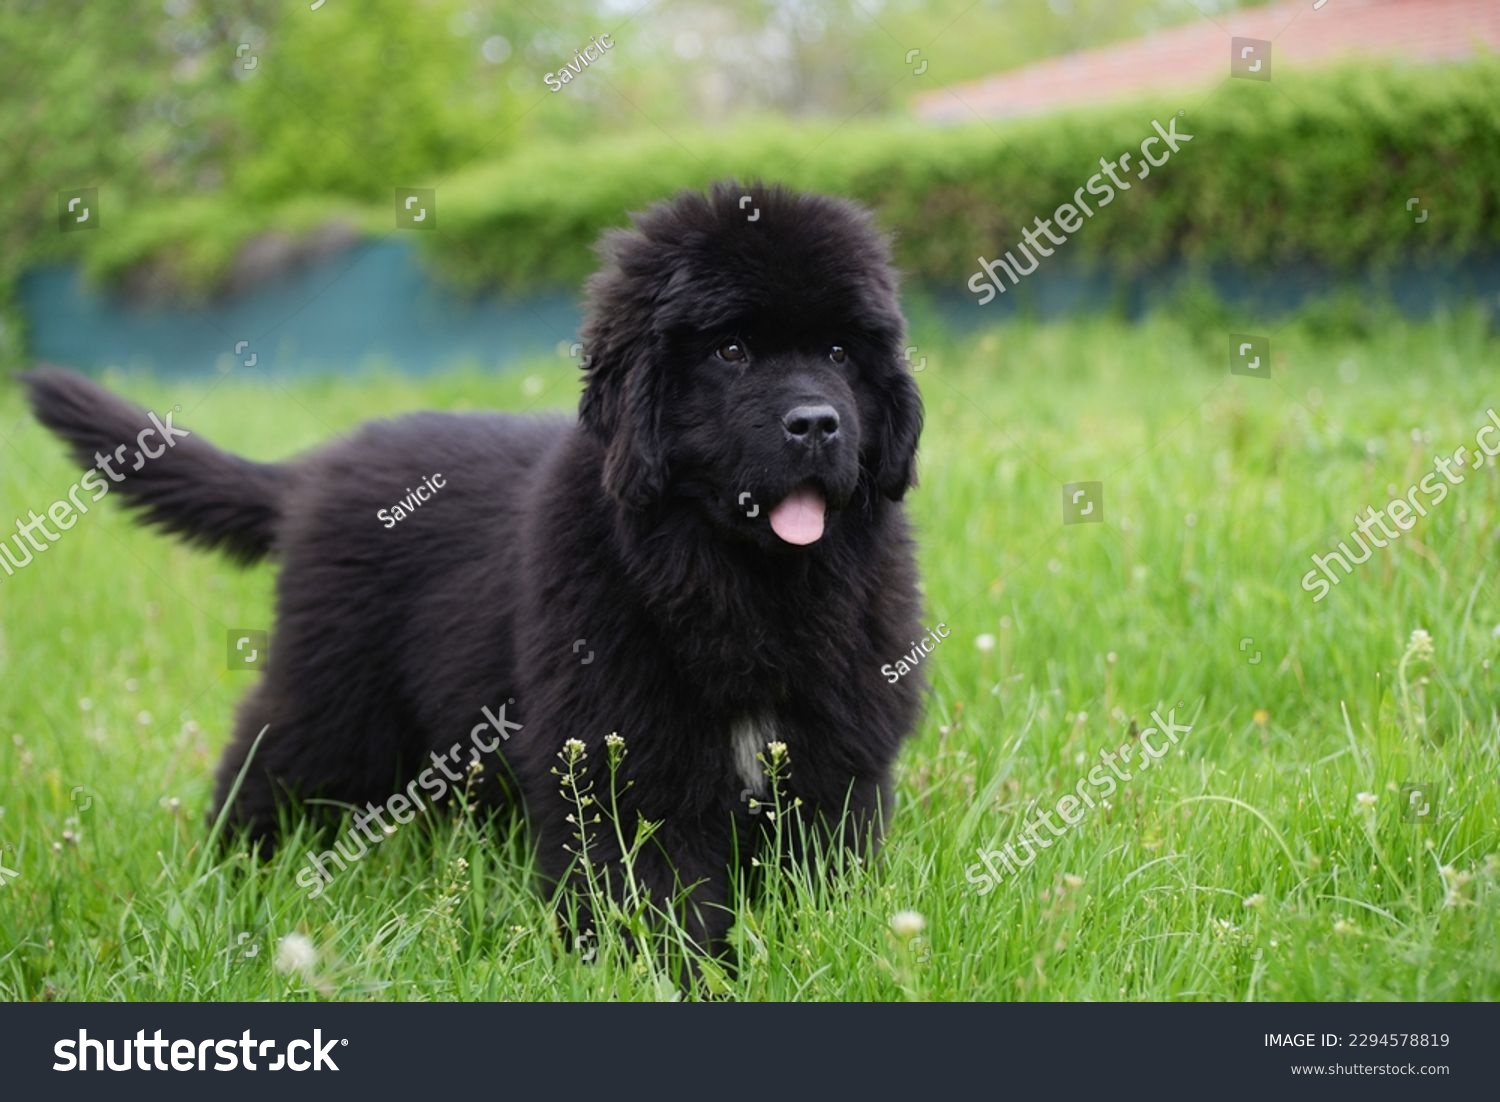 Newfoundland dog breed in an outdoor. Big   Rescue dog. Show breed of dog #2294578819